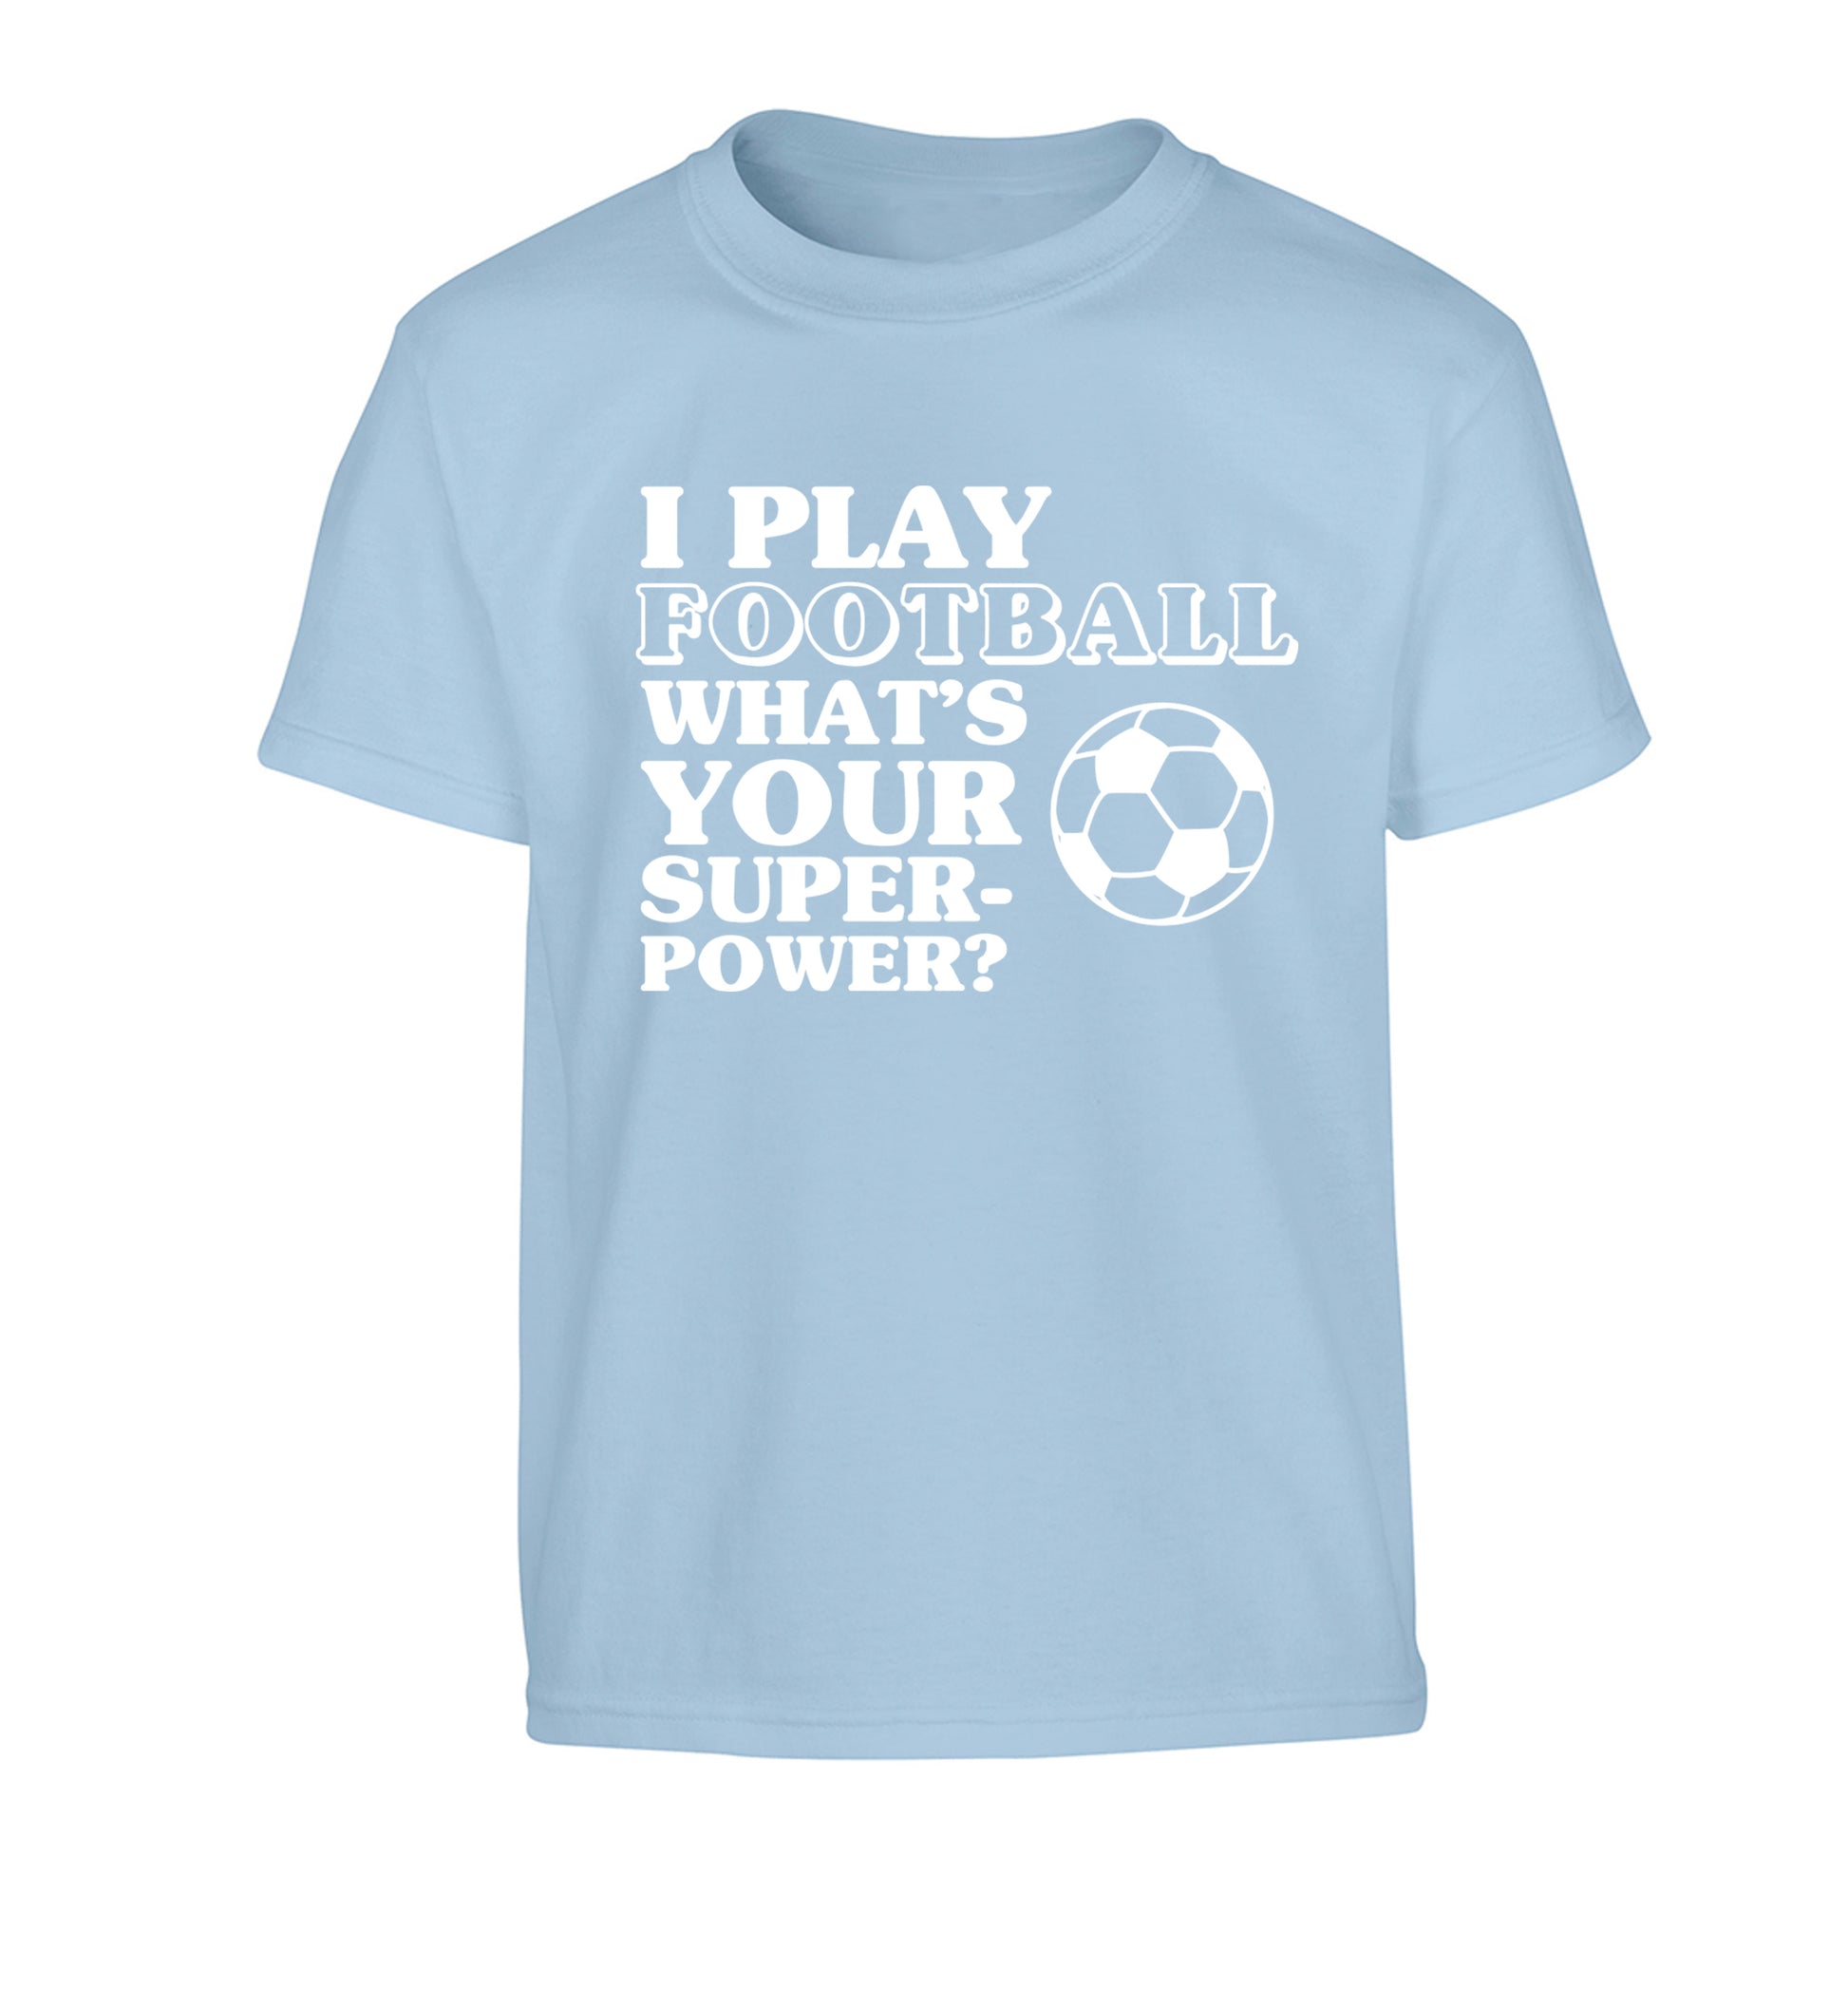 I play football what's your superpower? Children's light blue Tshirt 12-14 Years